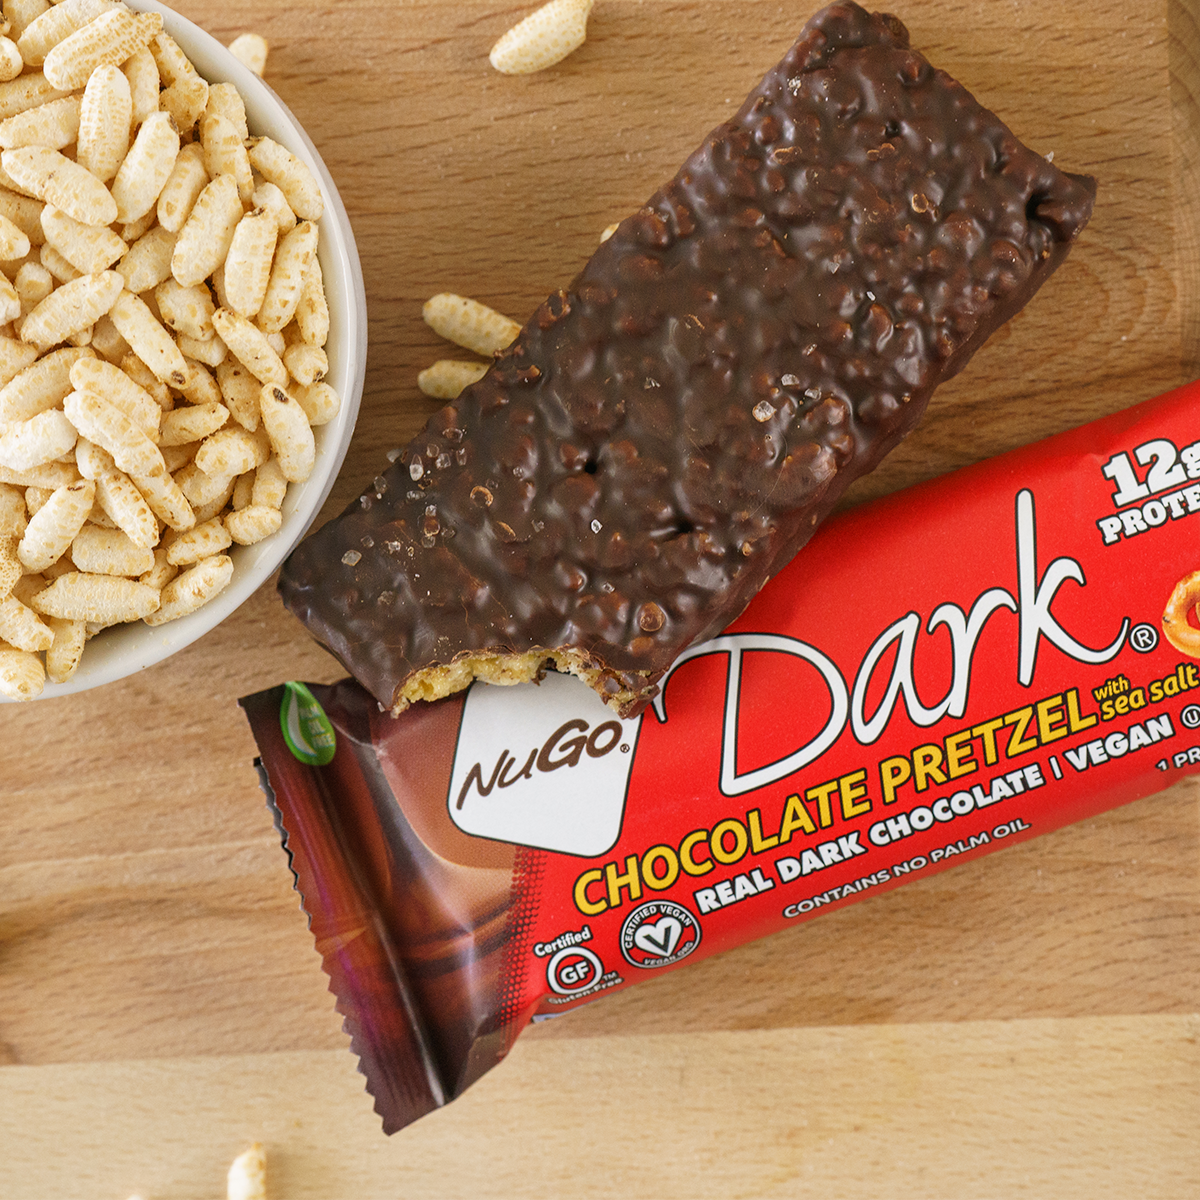 NuGo Dark Chocolate Pretzel wrapped bar with a second unwrapper bar with a bite out of it